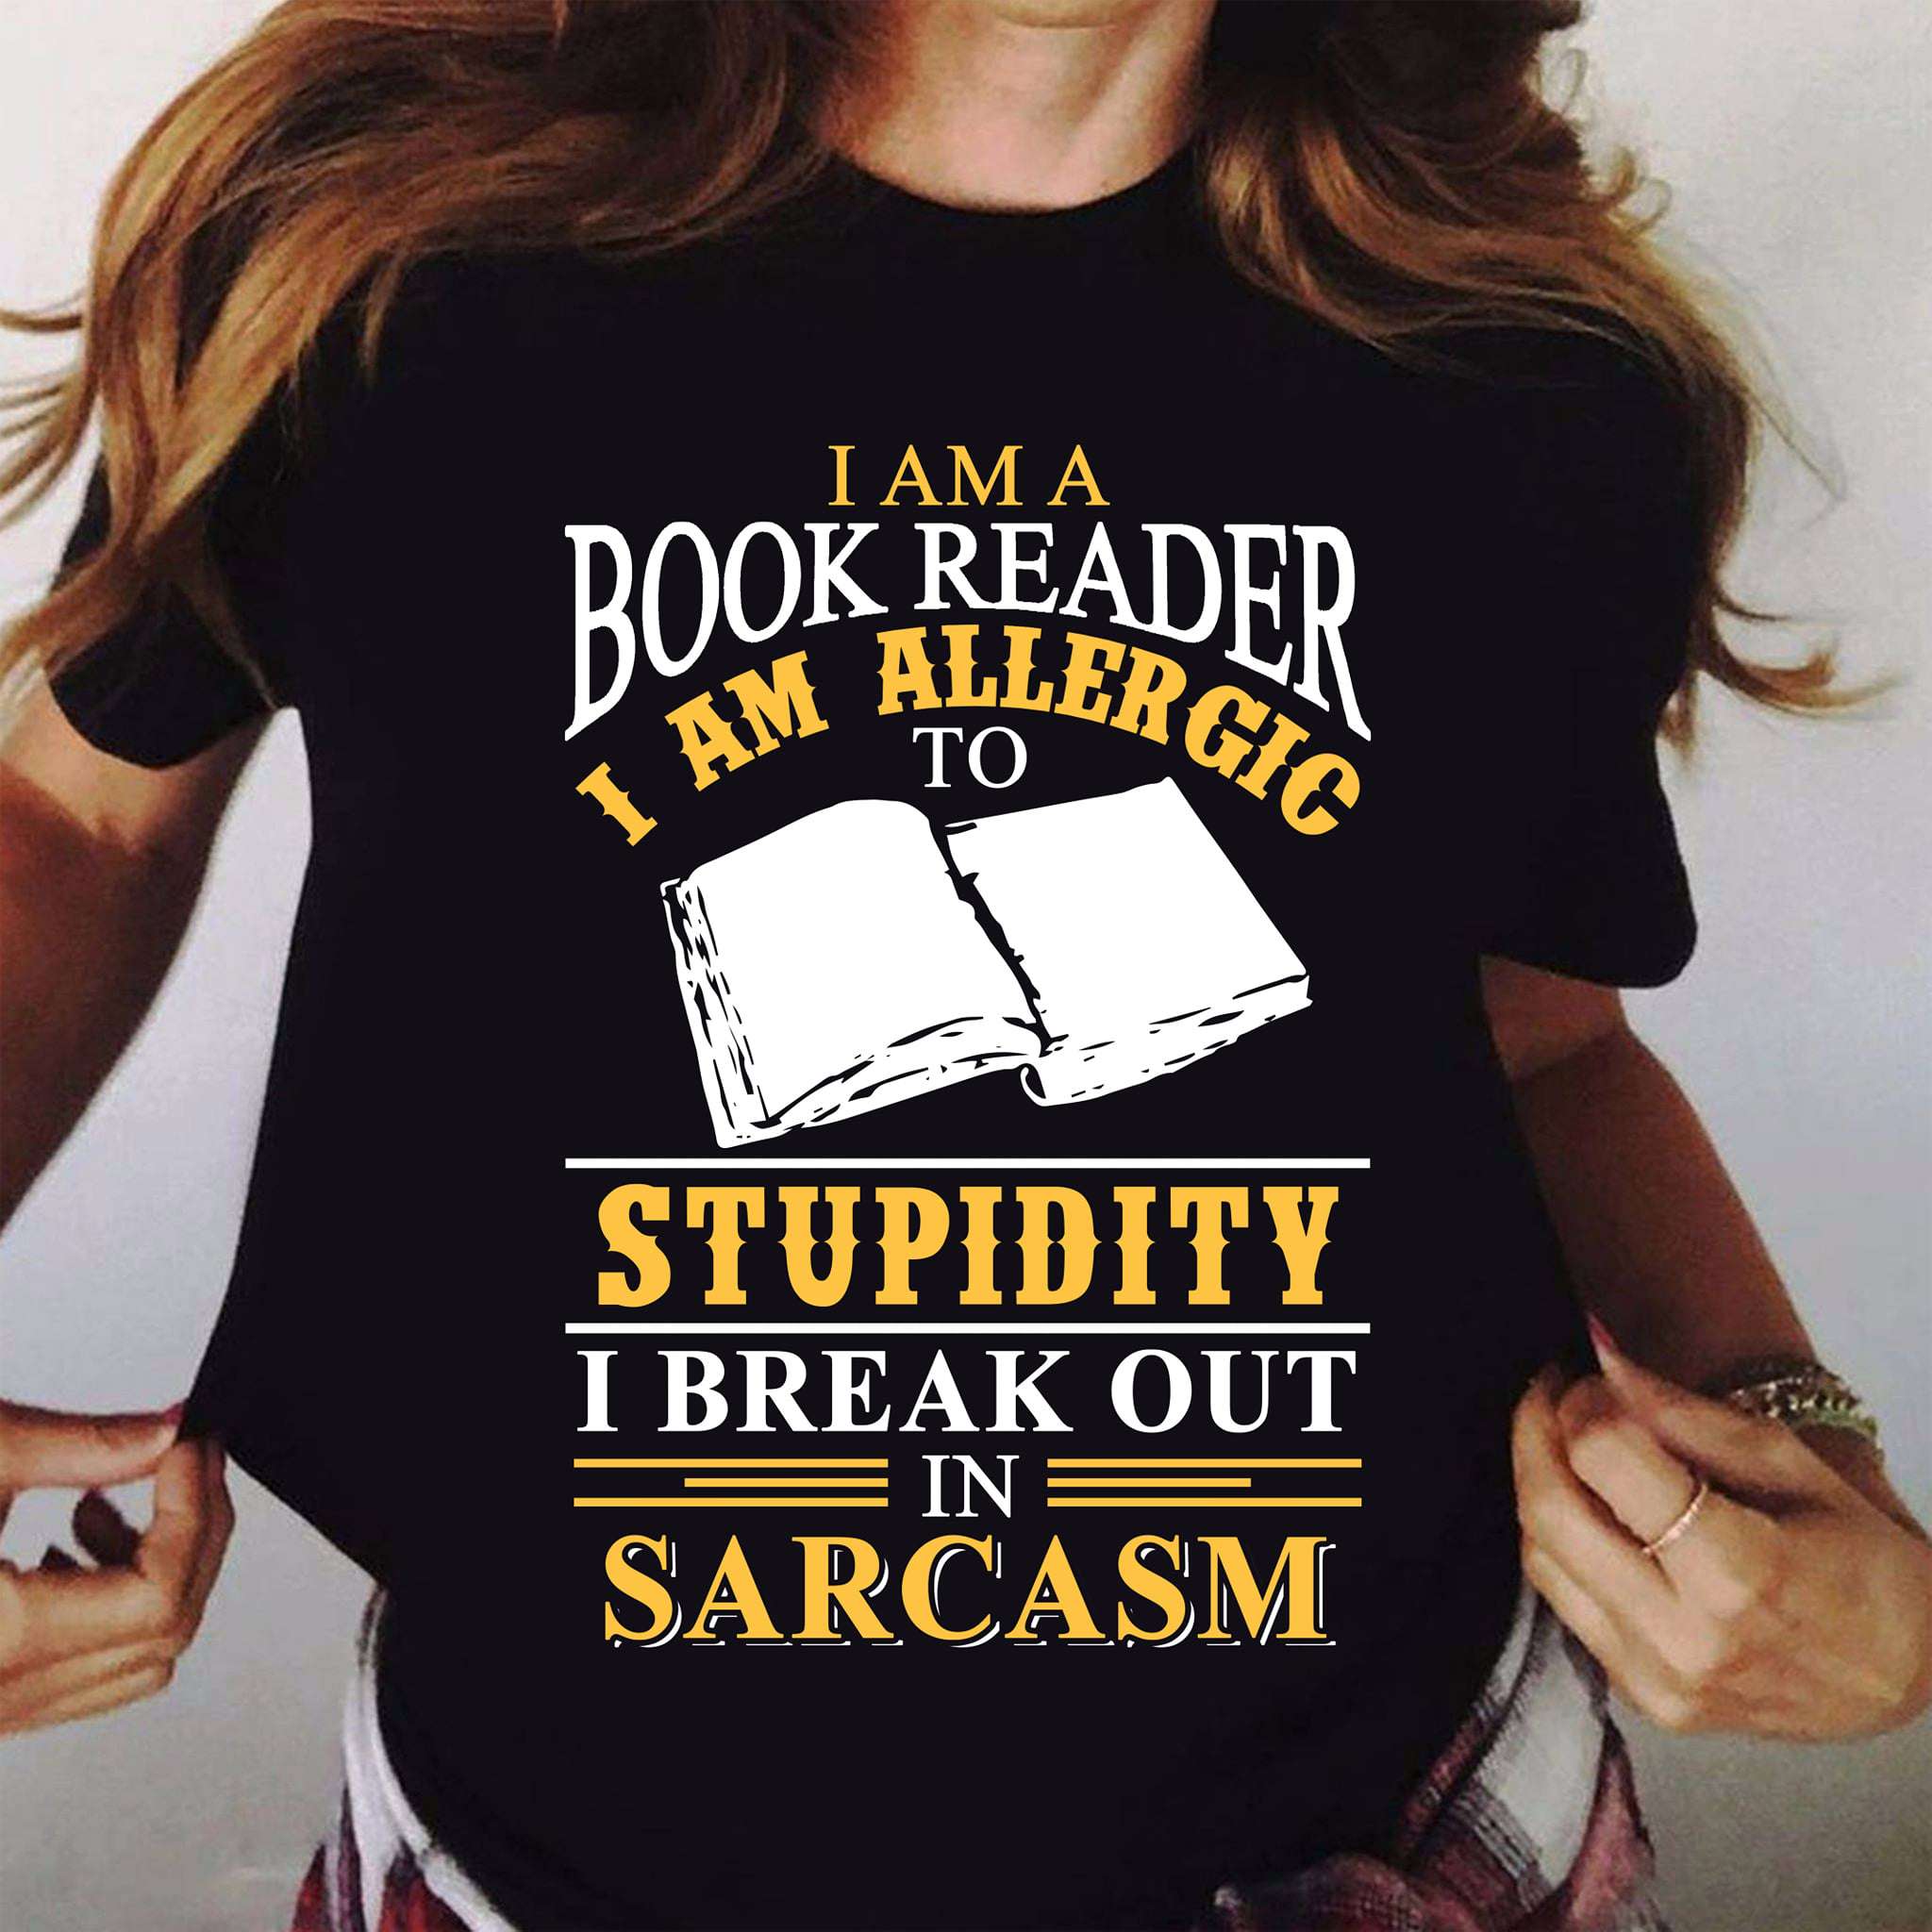 I am a book read I am allergic to stupidity, I break out in sarcasm